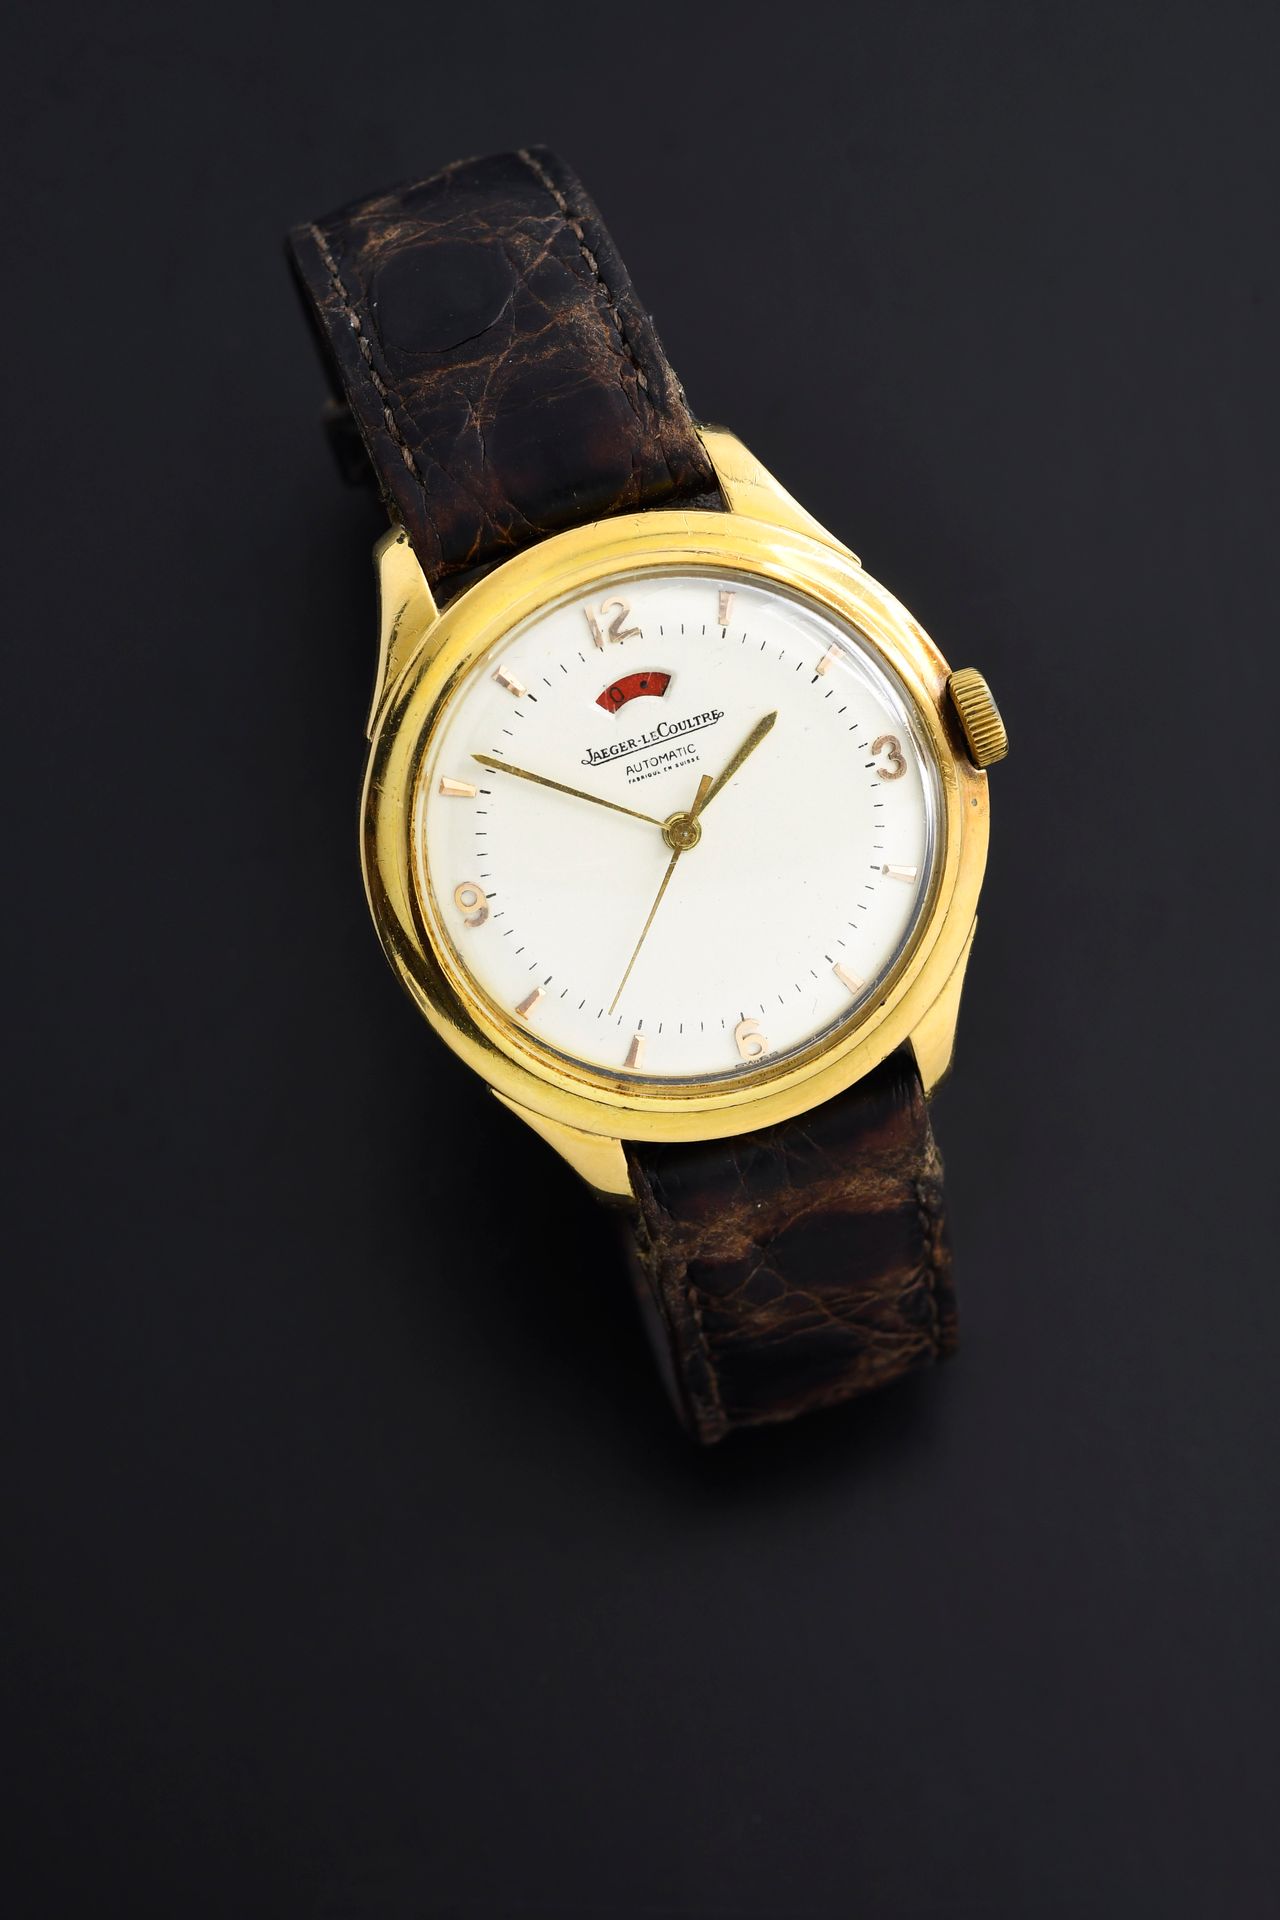 Null JAEGER-LeCOULTRE (Power Reserve / GT - Oro amarillo nº 117977), hacia 1950
&hellip;